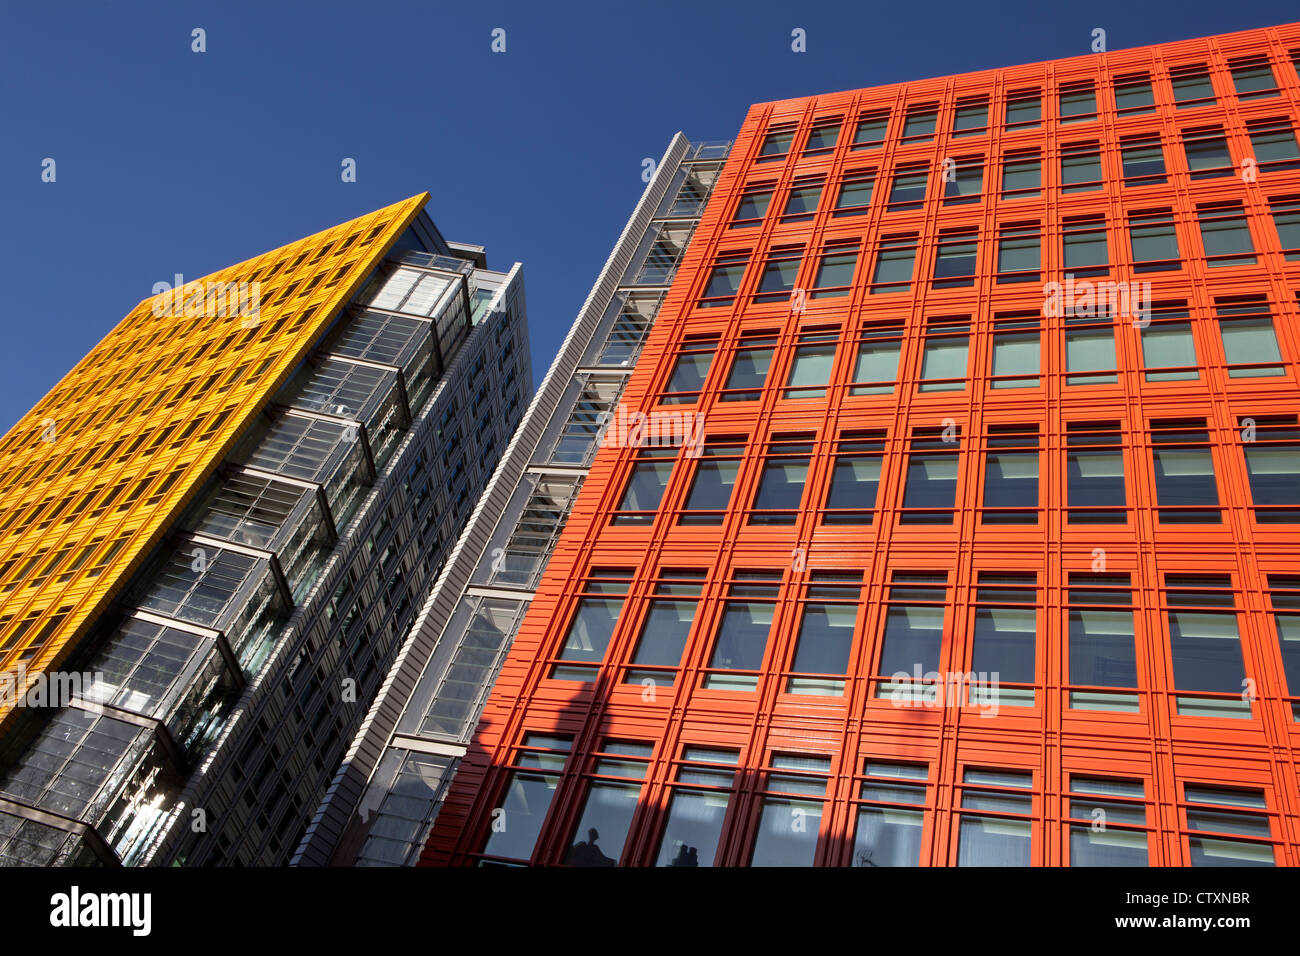 Brightly coloured apartments in London. Stock Photo